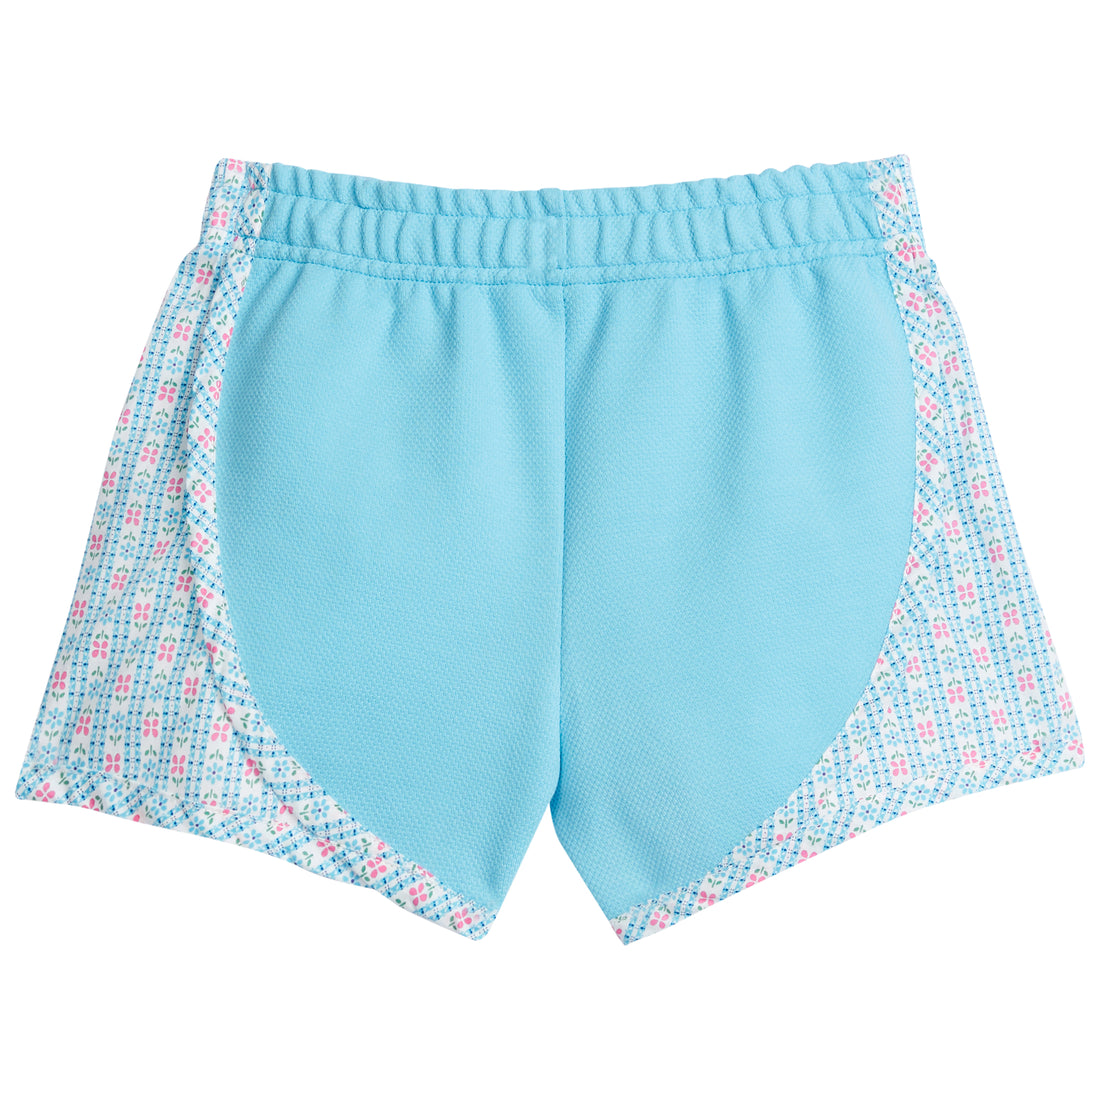 Girl/tween basic turquoise athletic type short with blue daisy pattern print along outside of shorts. 